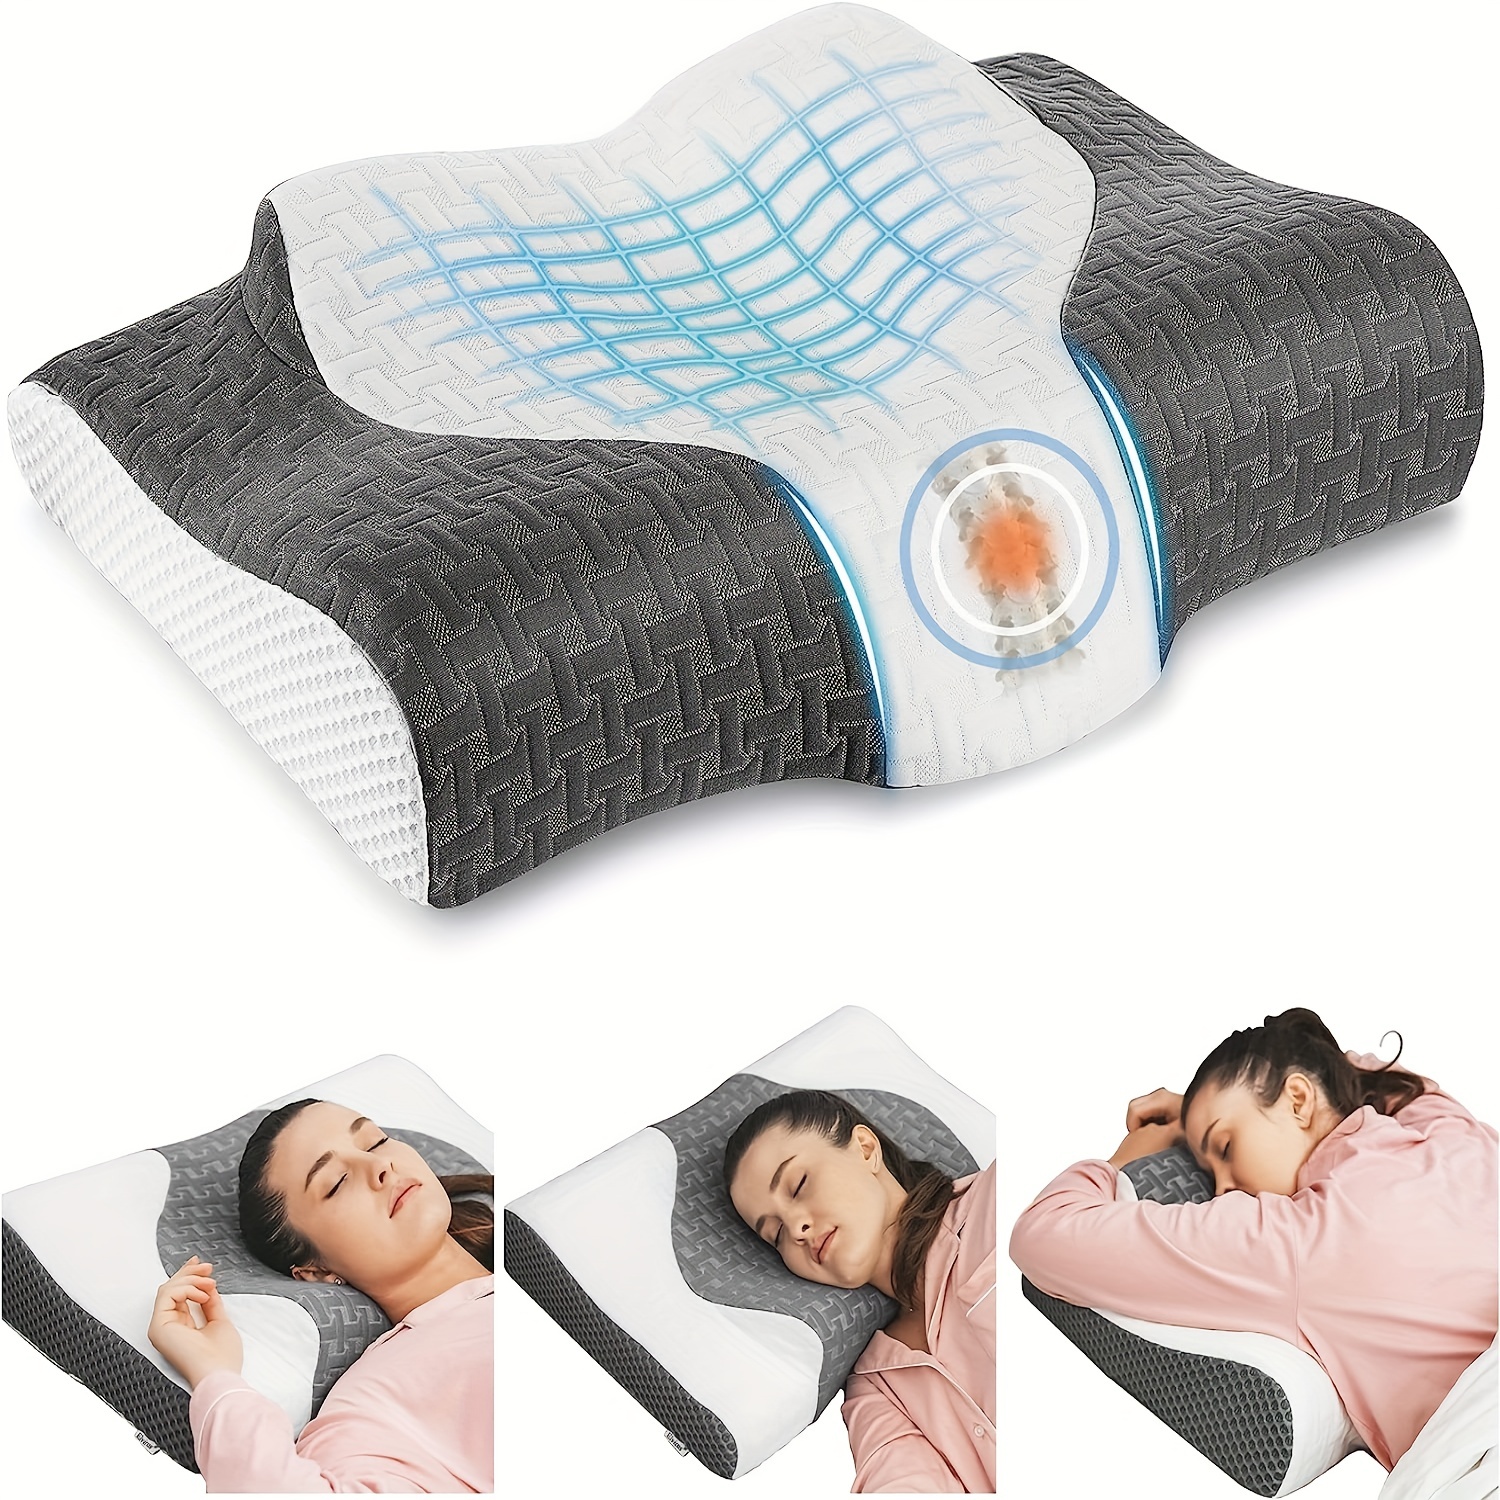 Cervical Pillow Memory Foam Bed Pillows For Neck And - Temu